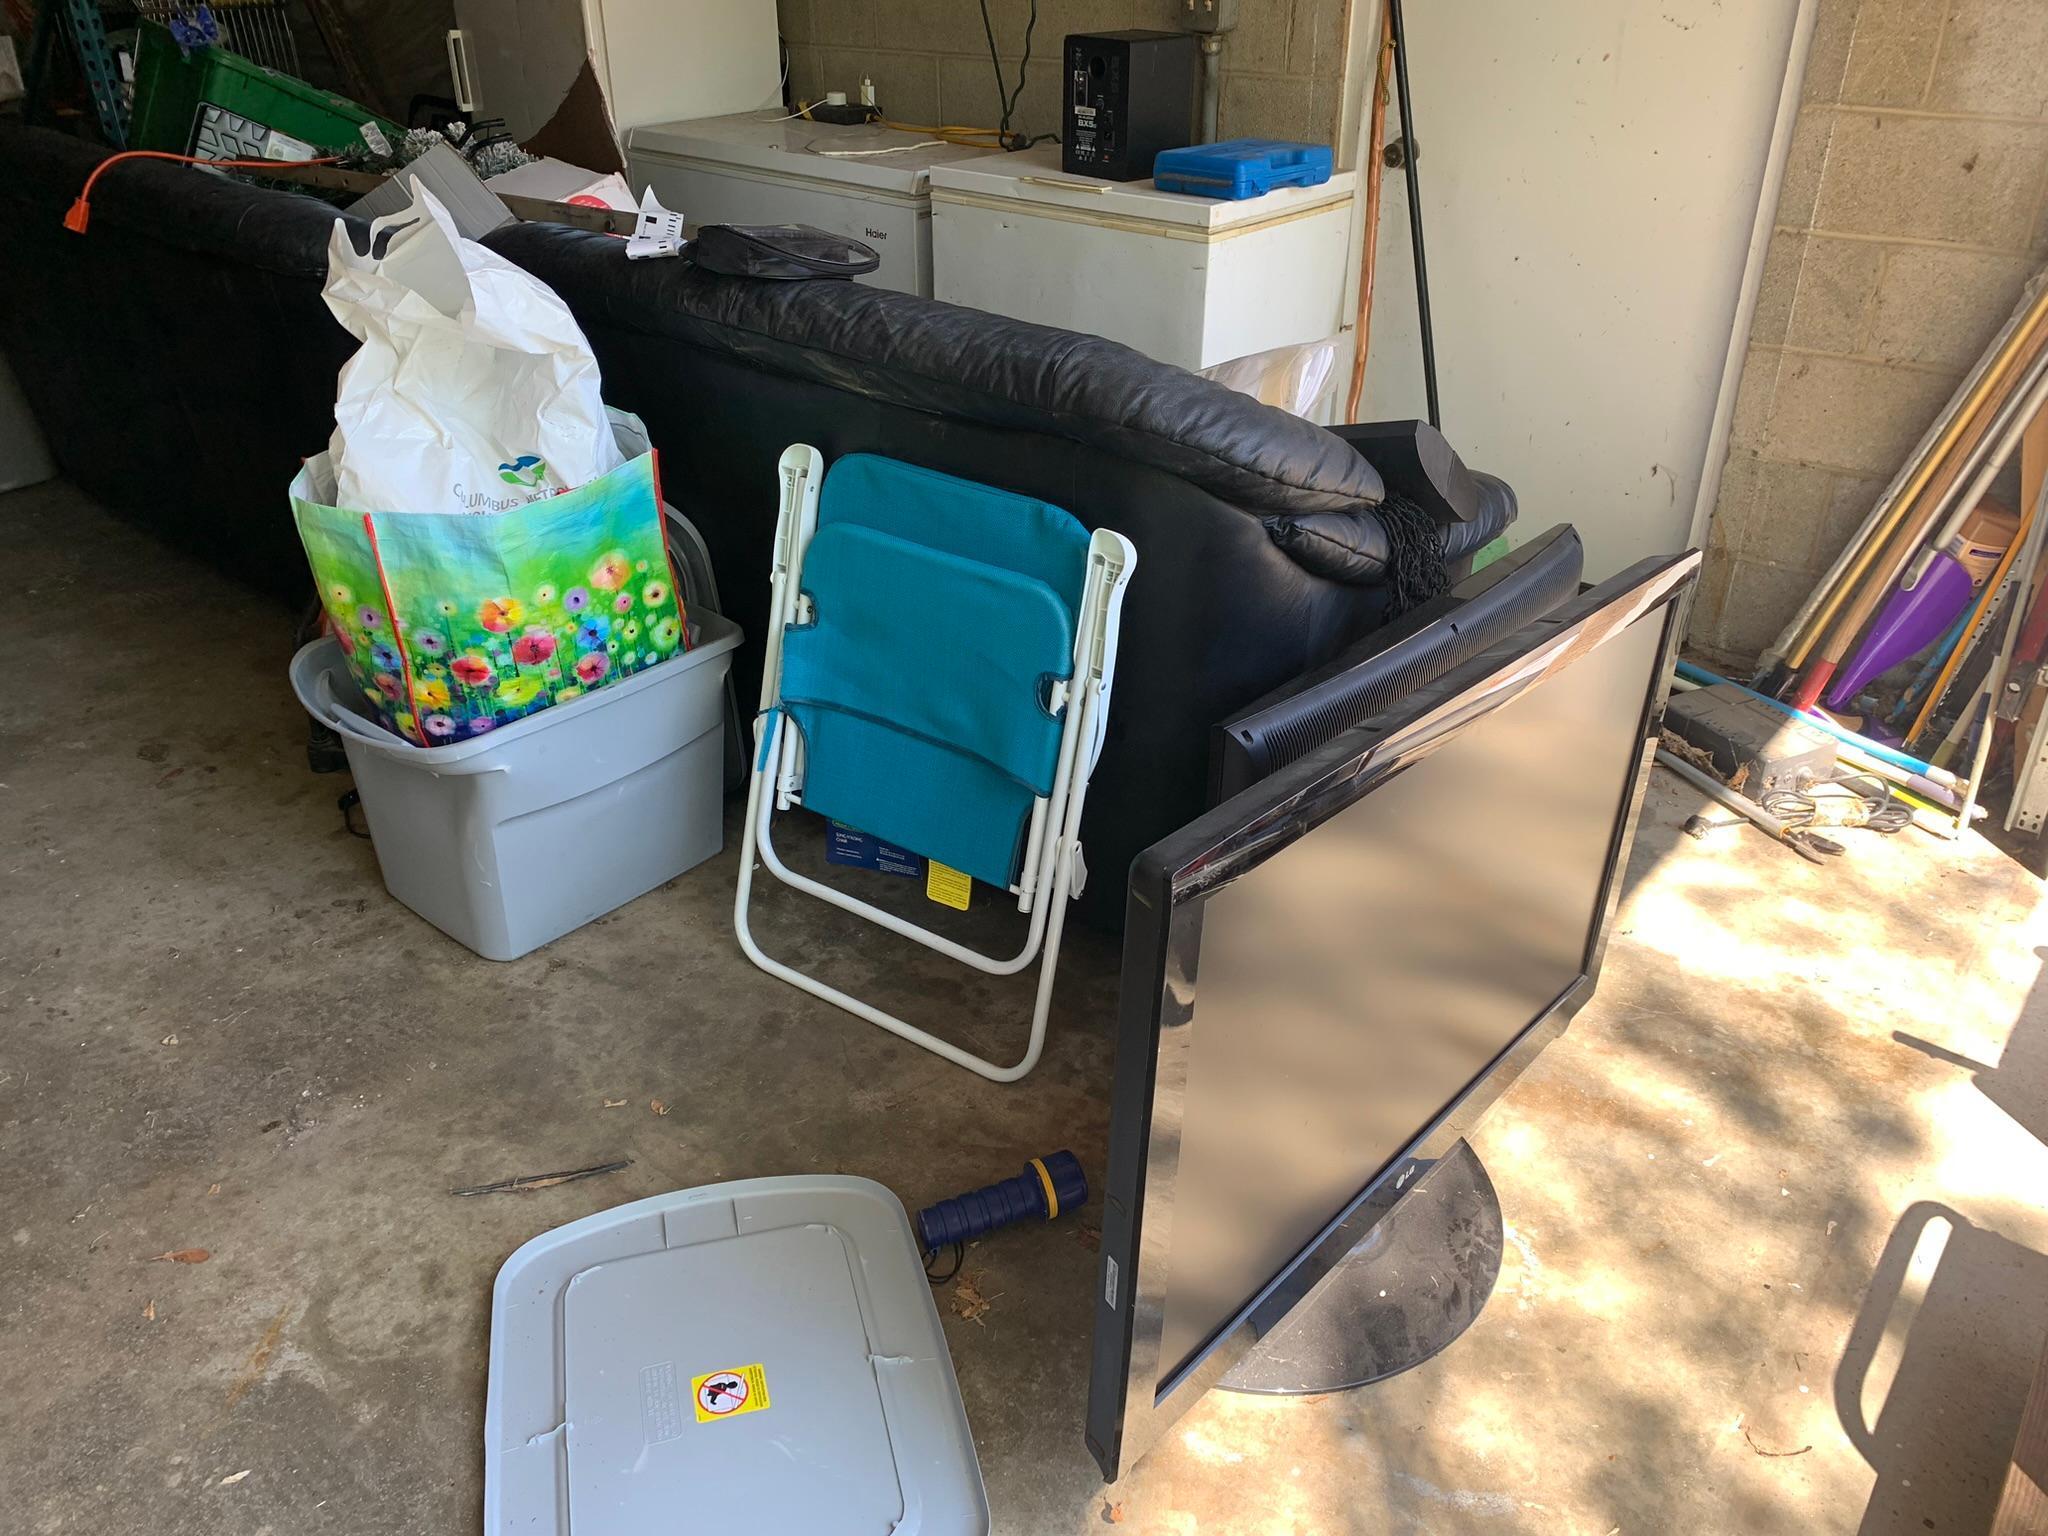 Garage and Outdoor Area Contents - Tools, Shelving, Hardware, Fryers,